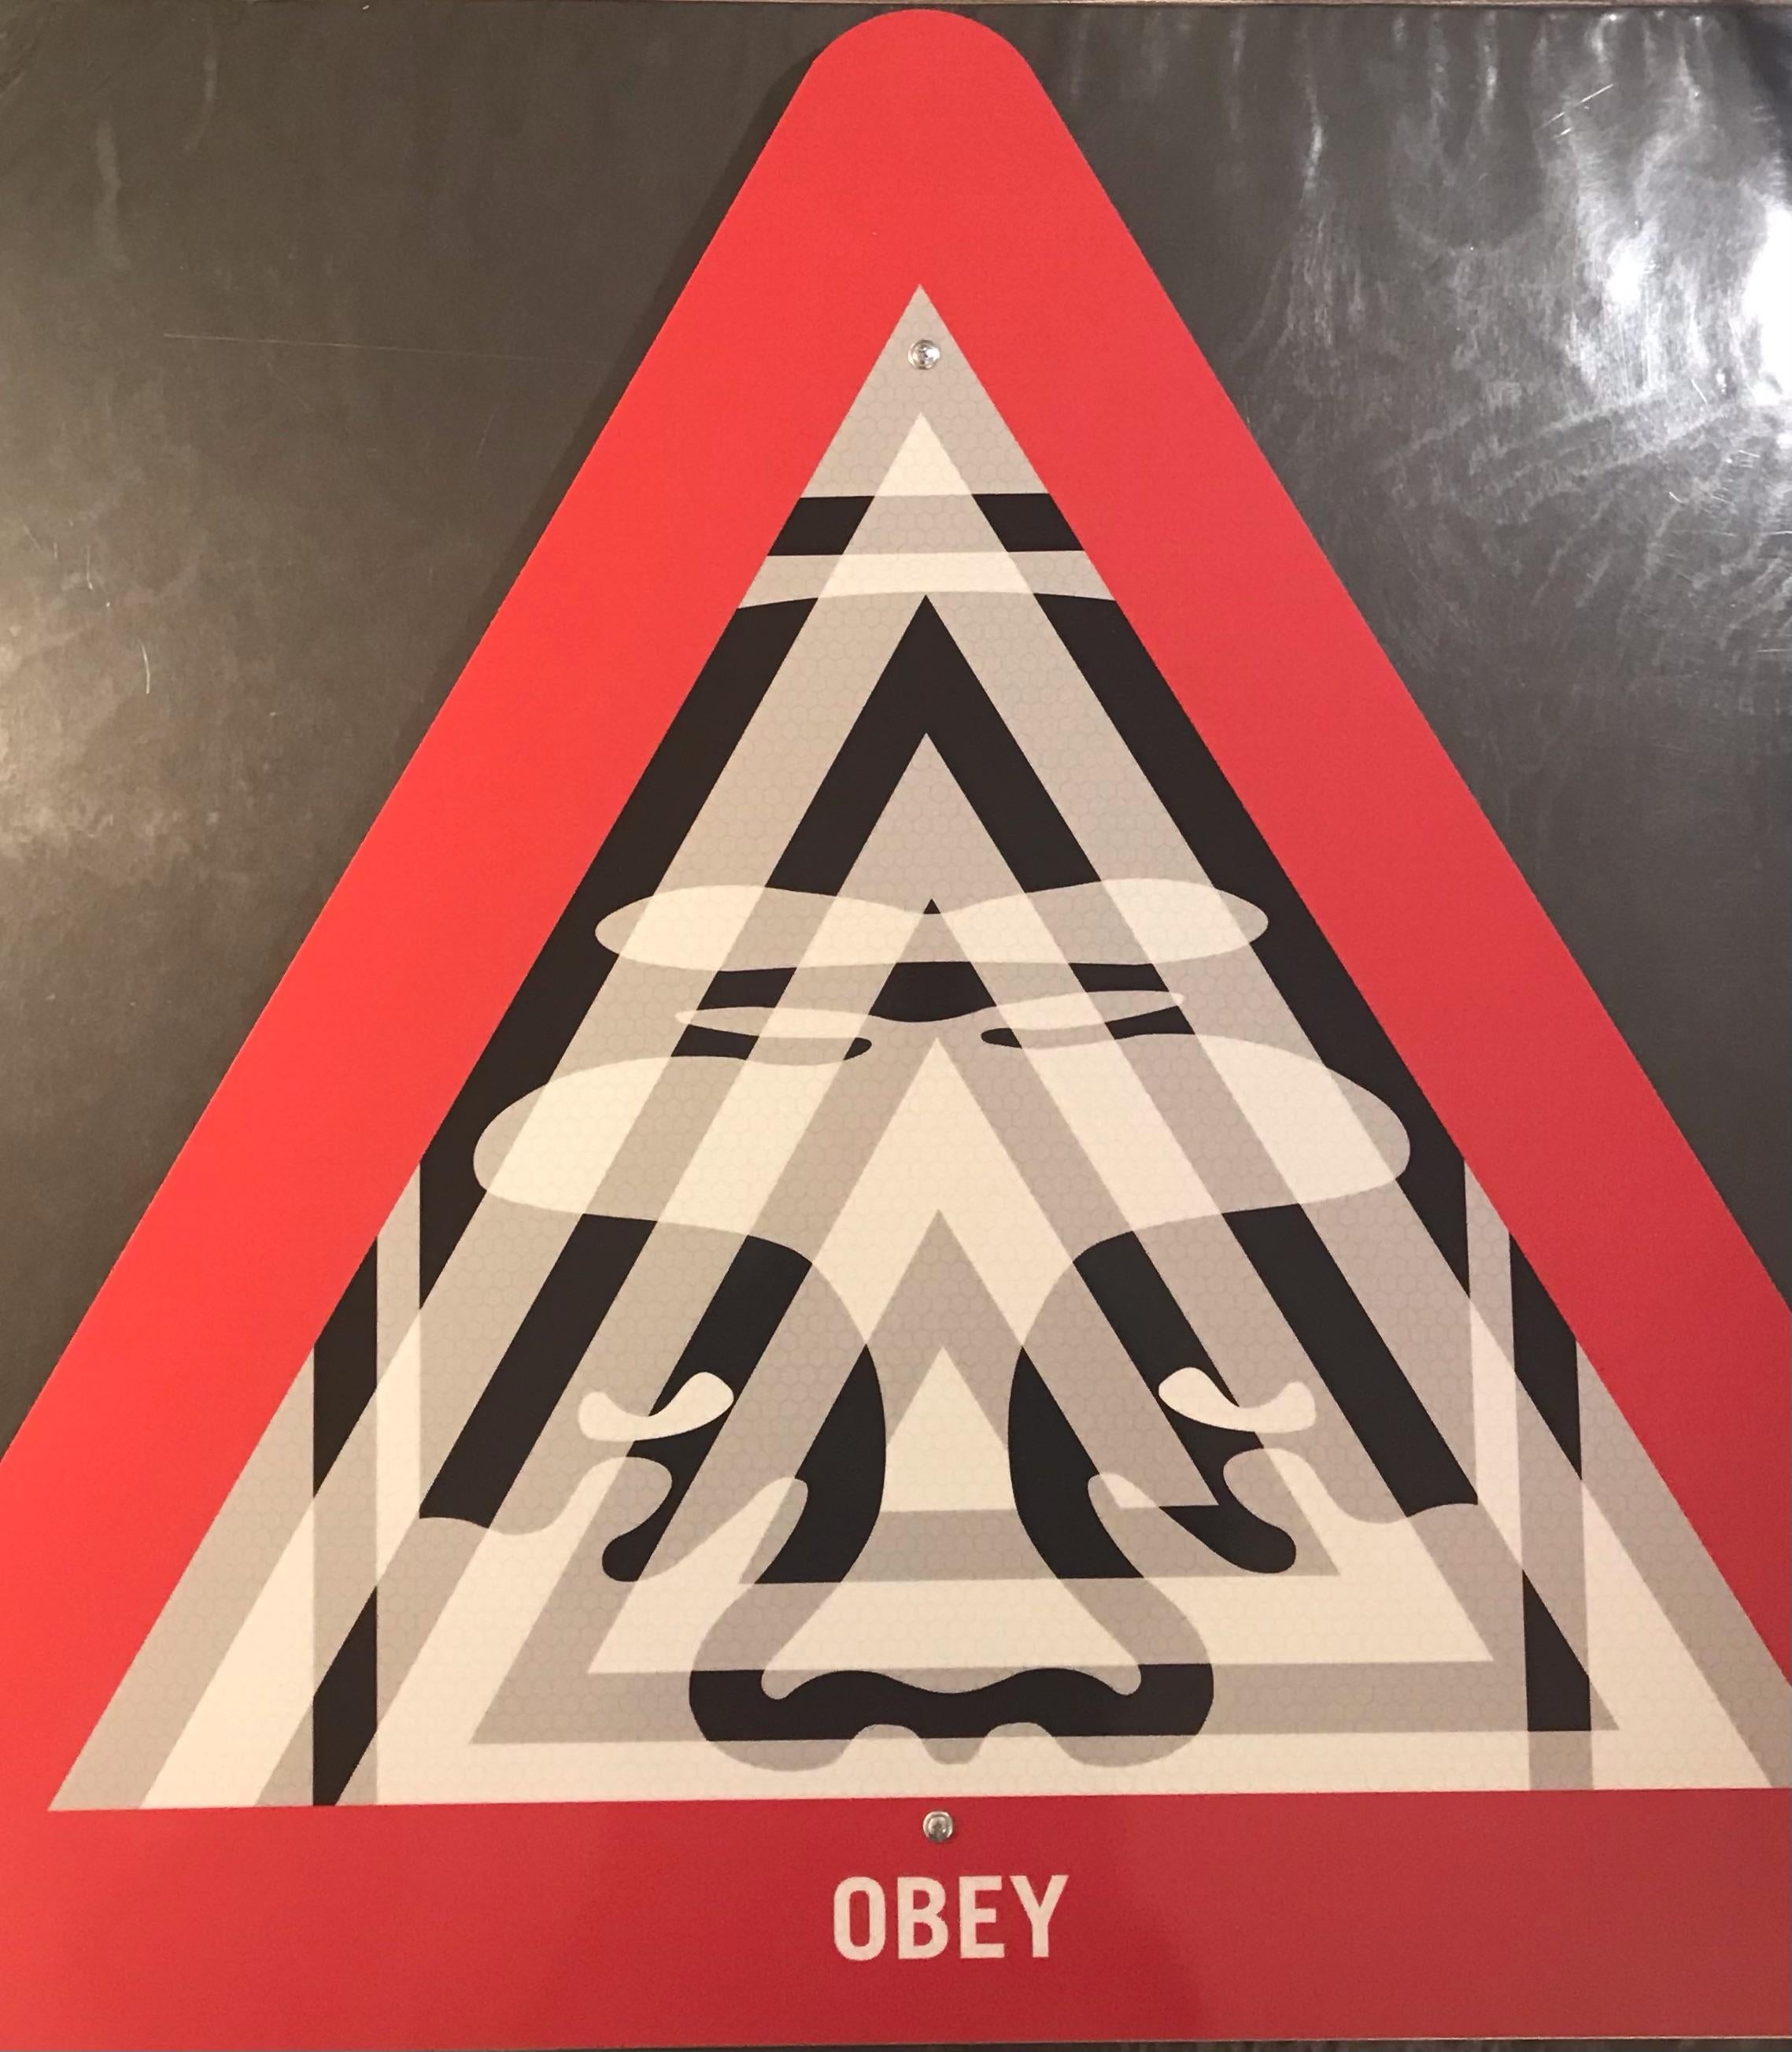 TITLE:
Shepard Fairey “Unyielding” Aluminum Signed Print Beyond The Streets Obey Giant With C.O.A.
YEAR:
2020
CLASSIFICATION:
Limited edition

MEDIUM TYPE:
Mixed Media with Screen Printing and wall Mount 
MEDIUM/MATERIALS:
Aluminum Metal Street Sign